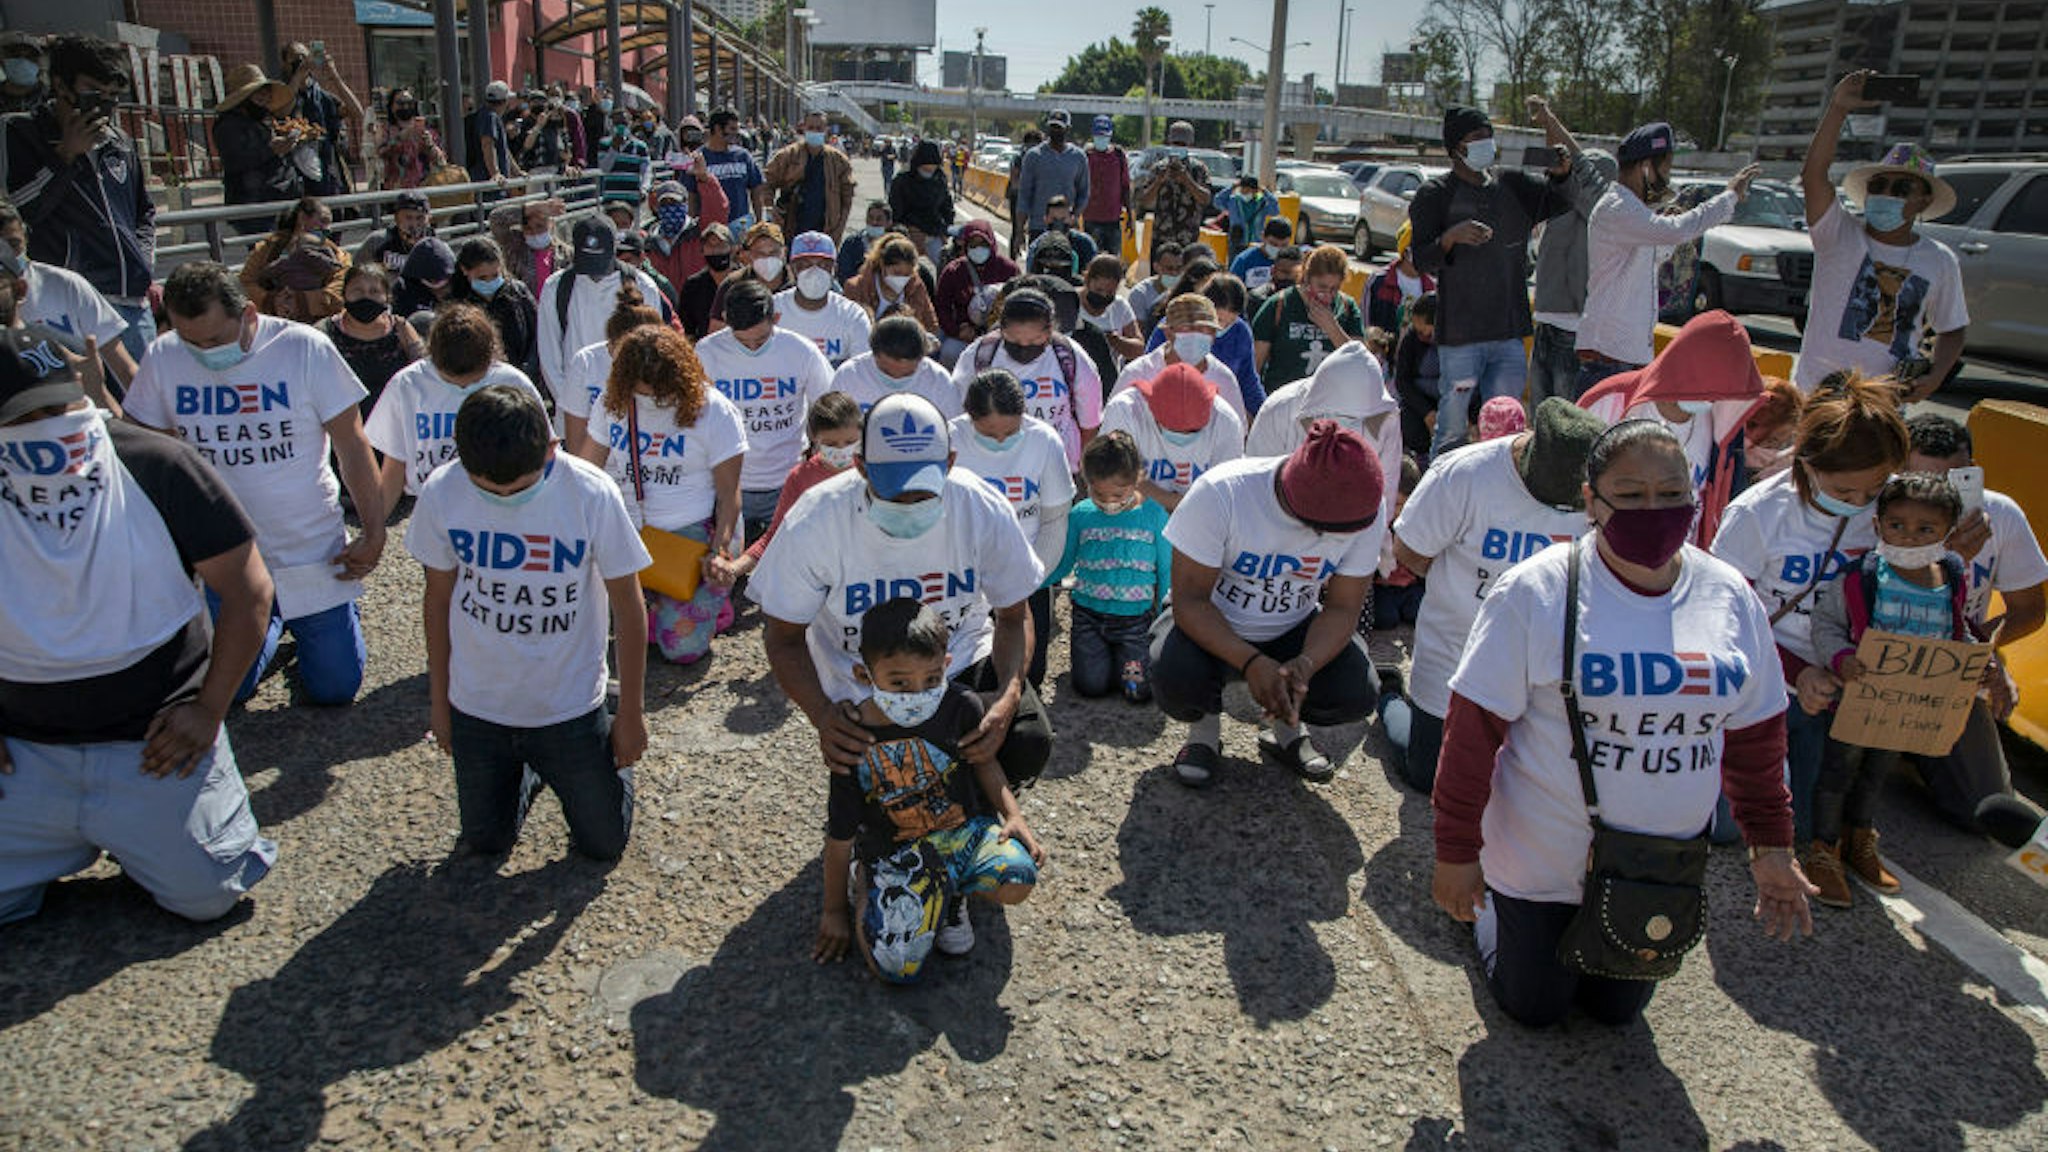 02 March 2021, Mexico, San Ysidro: A group of migrants wearing T-shirts that read "Biden, please let us in" kneel and pray at the border crossing. The group gathered and marched up to the border post to petition the new U.S. administration for asylum. U.S. Border Patrol (CPB) agents conducted a heavier operation at the border crossing with the goal of preventing a stampede.